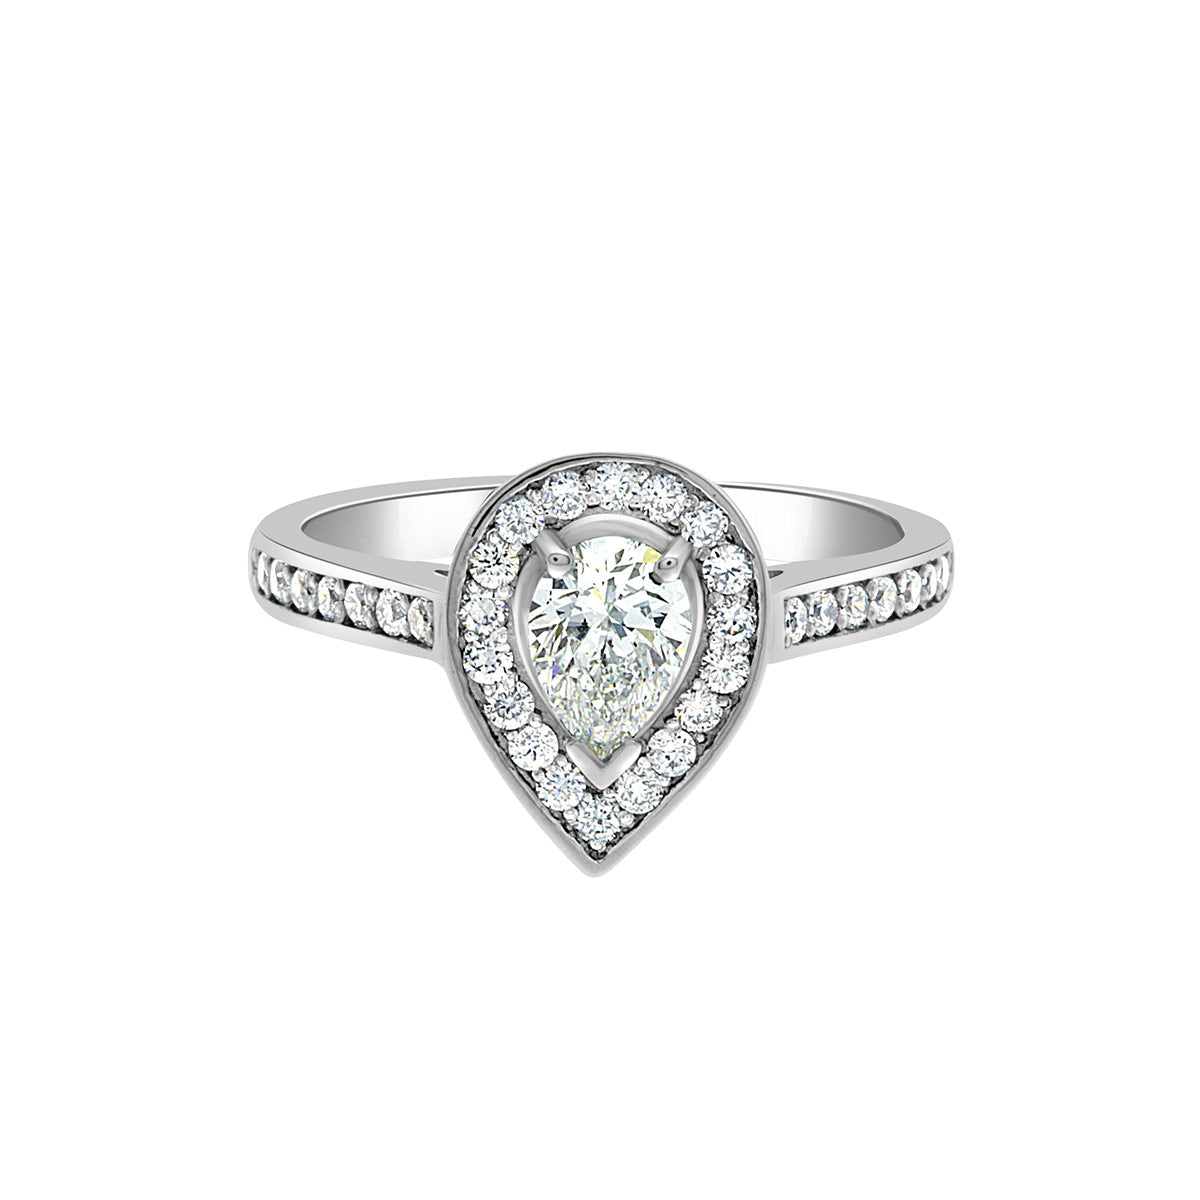 Pear Shaped Halo Engagement Ring in white gold